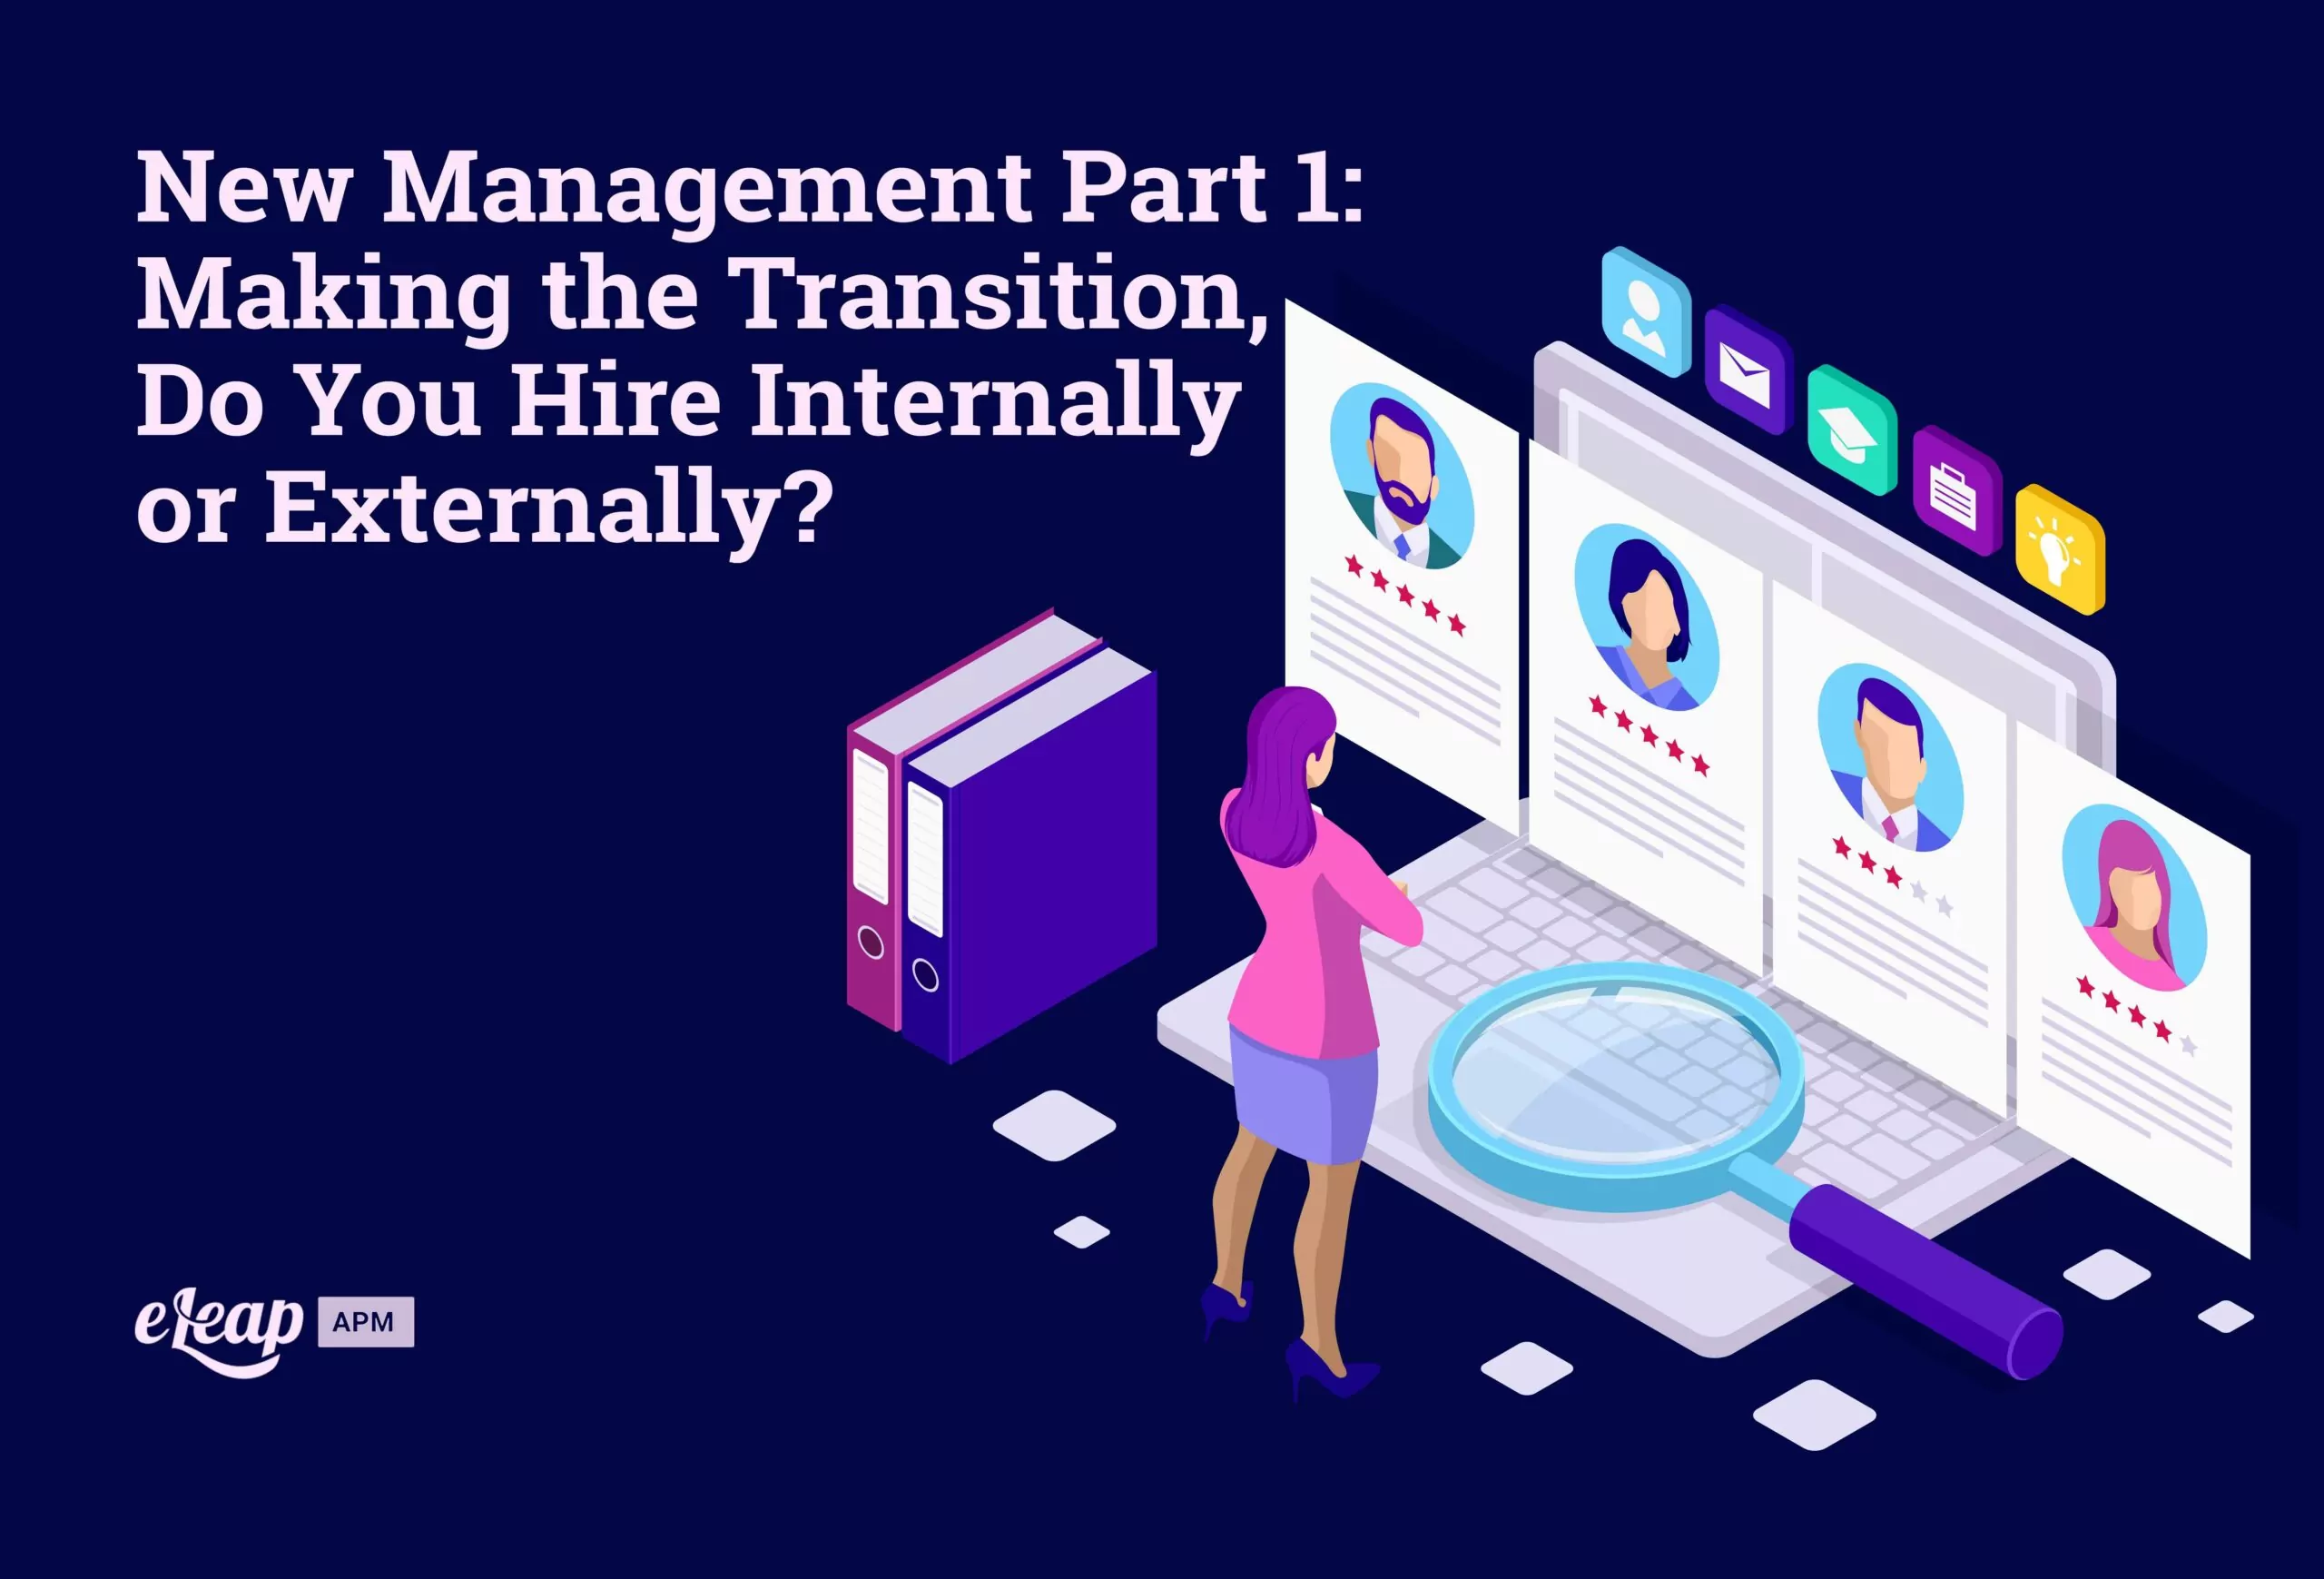 New Management Part 1: Making the Transition, Do You Hire Internally or Externally?